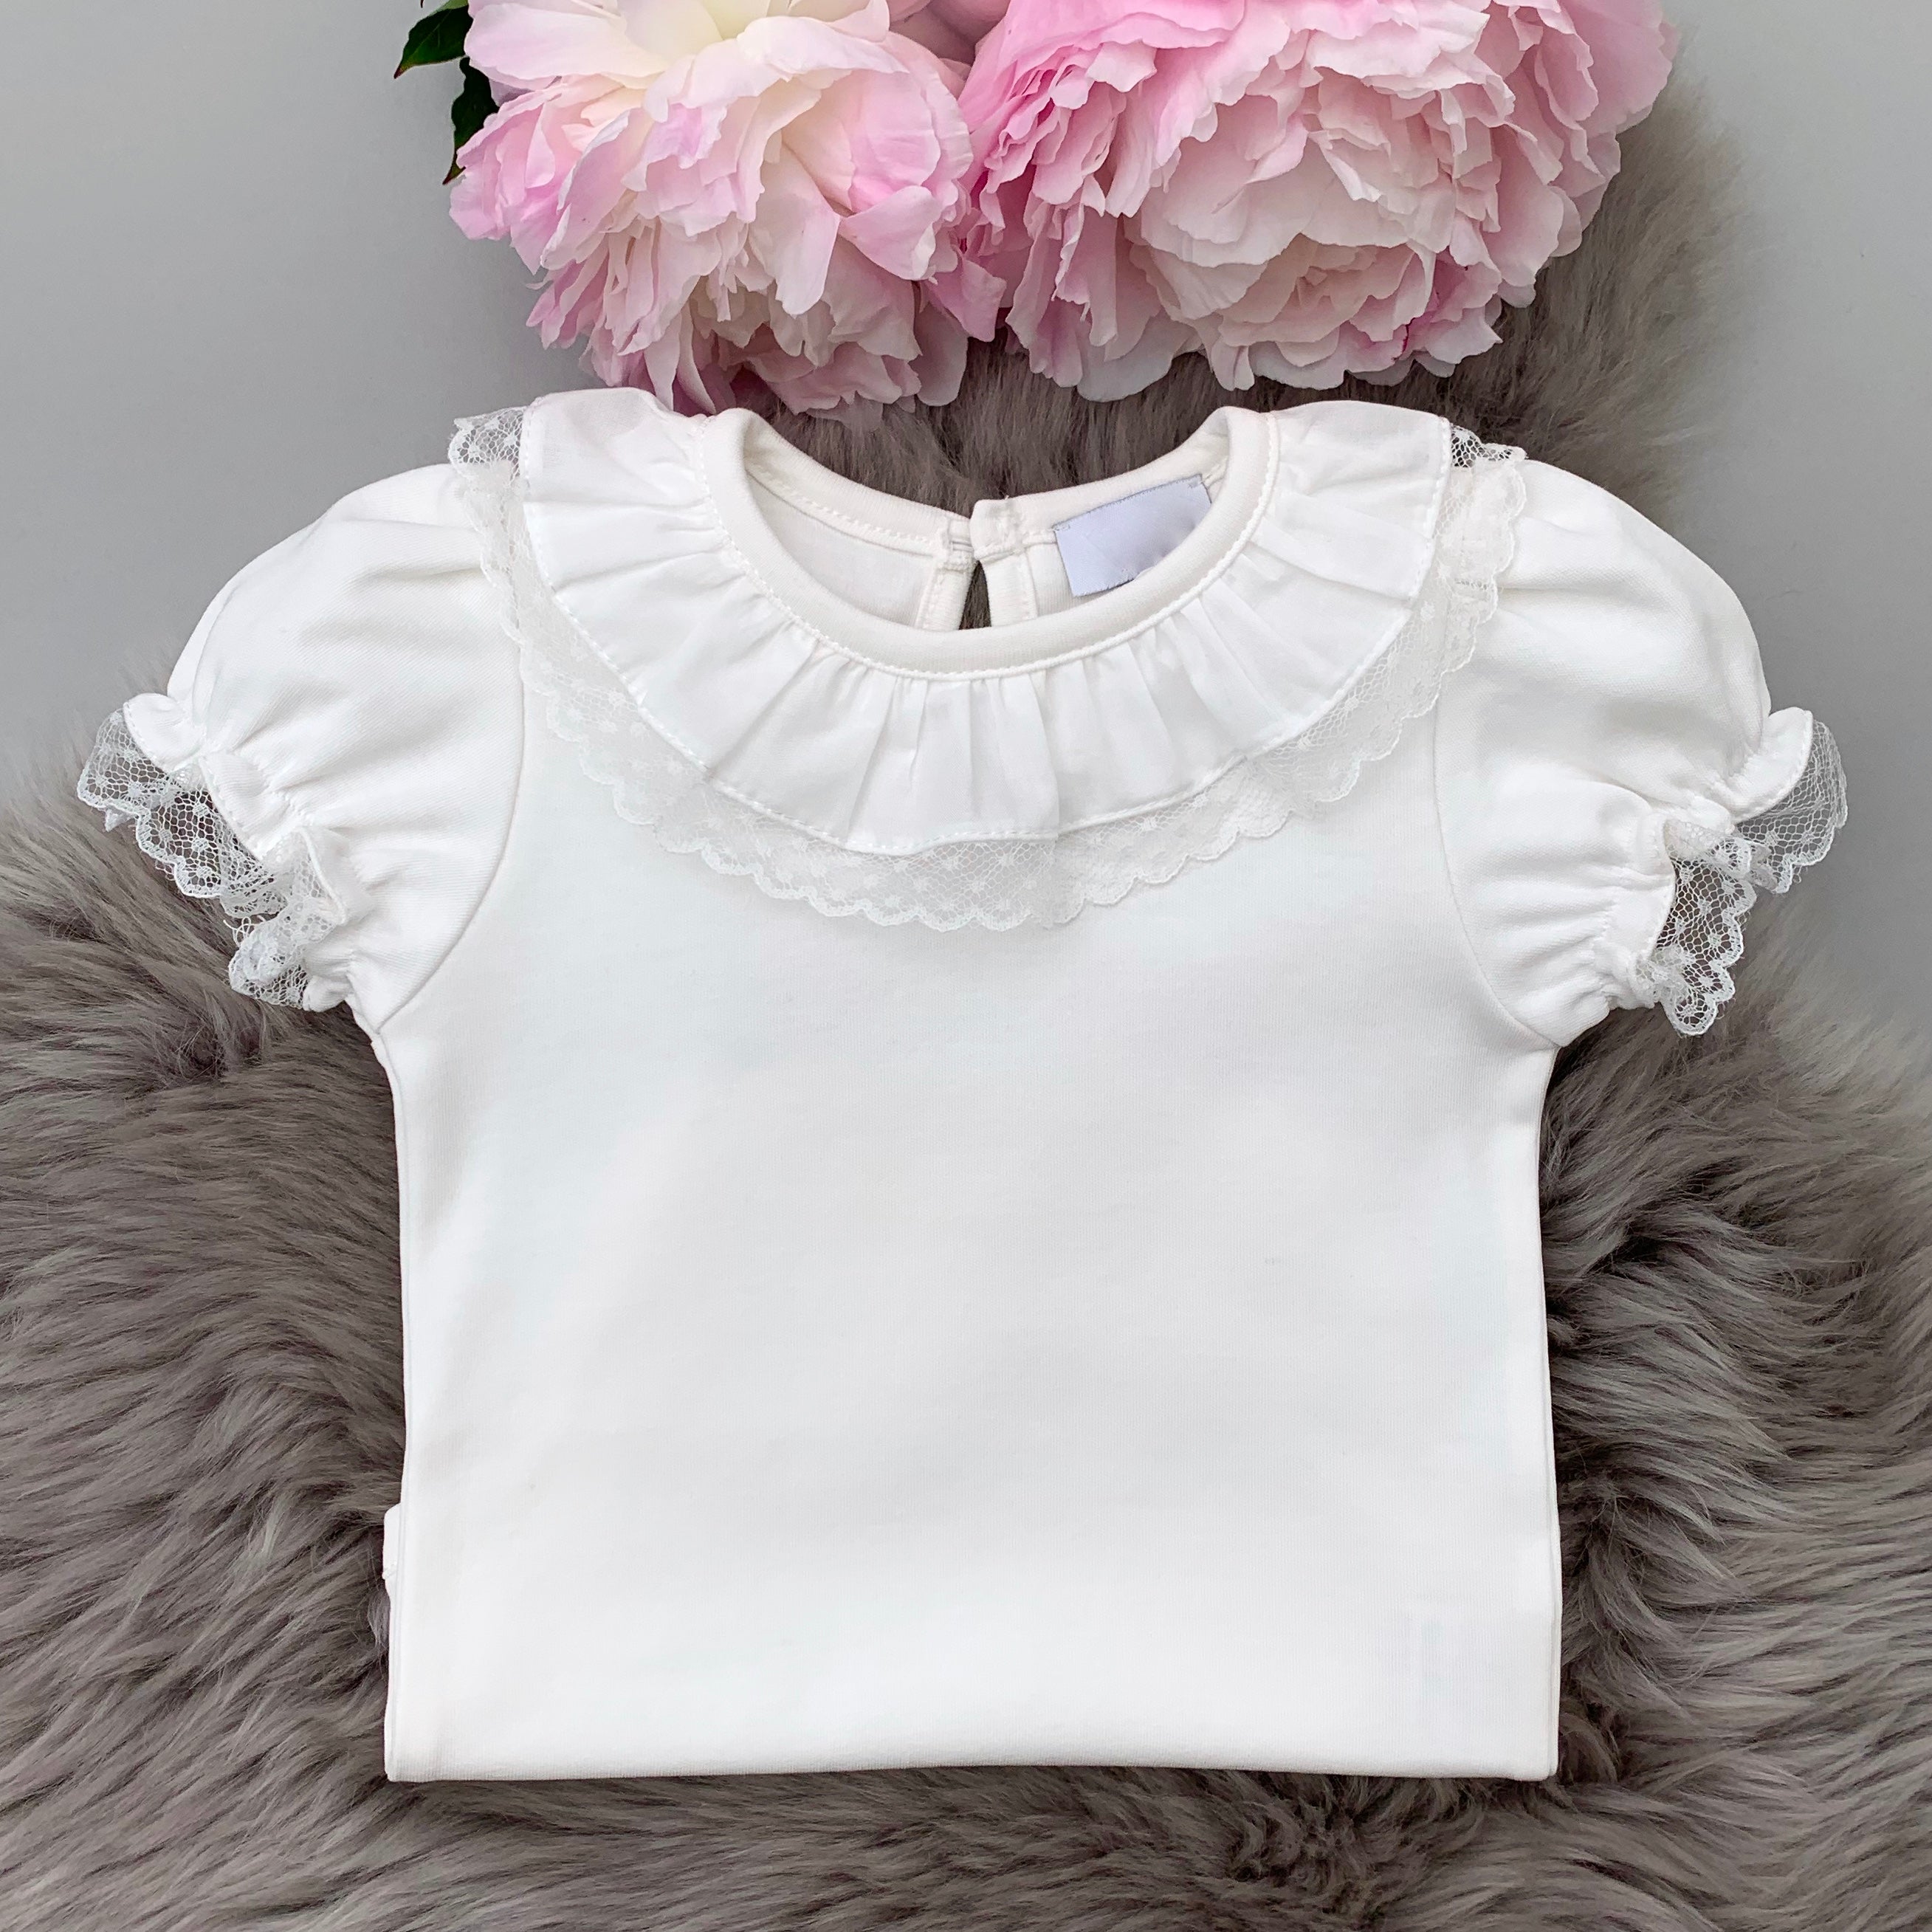 portuguese baby bodysuit with a lace edge frill collar in ivory colour